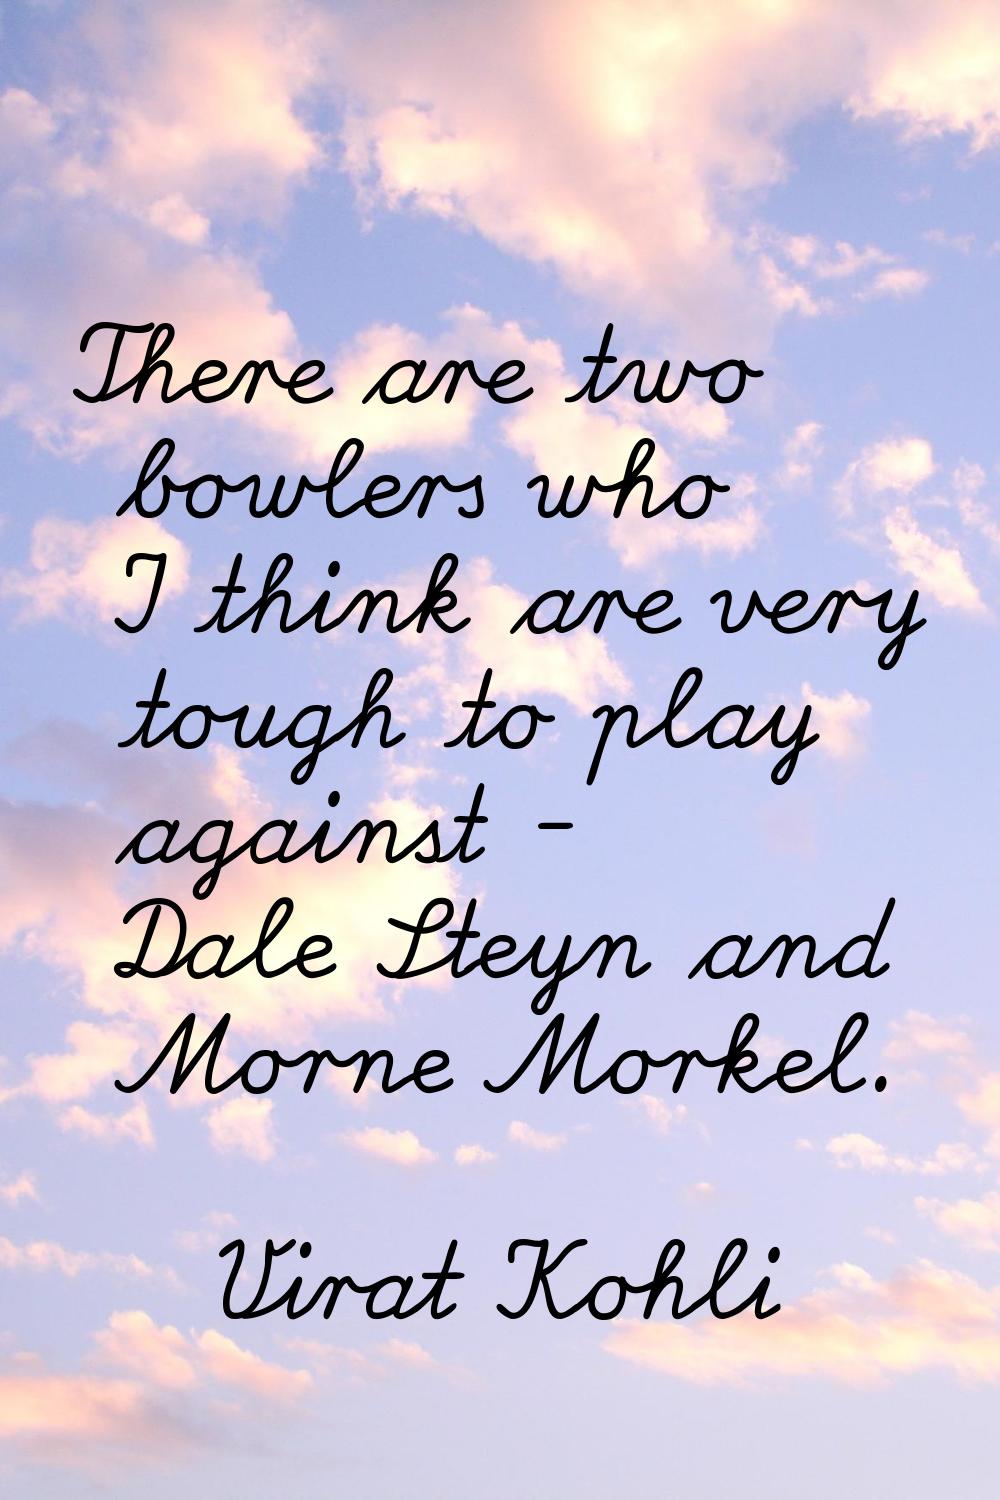 There are two bowlers who I think are very tough to play against - Dale Steyn and Morne Morkel.